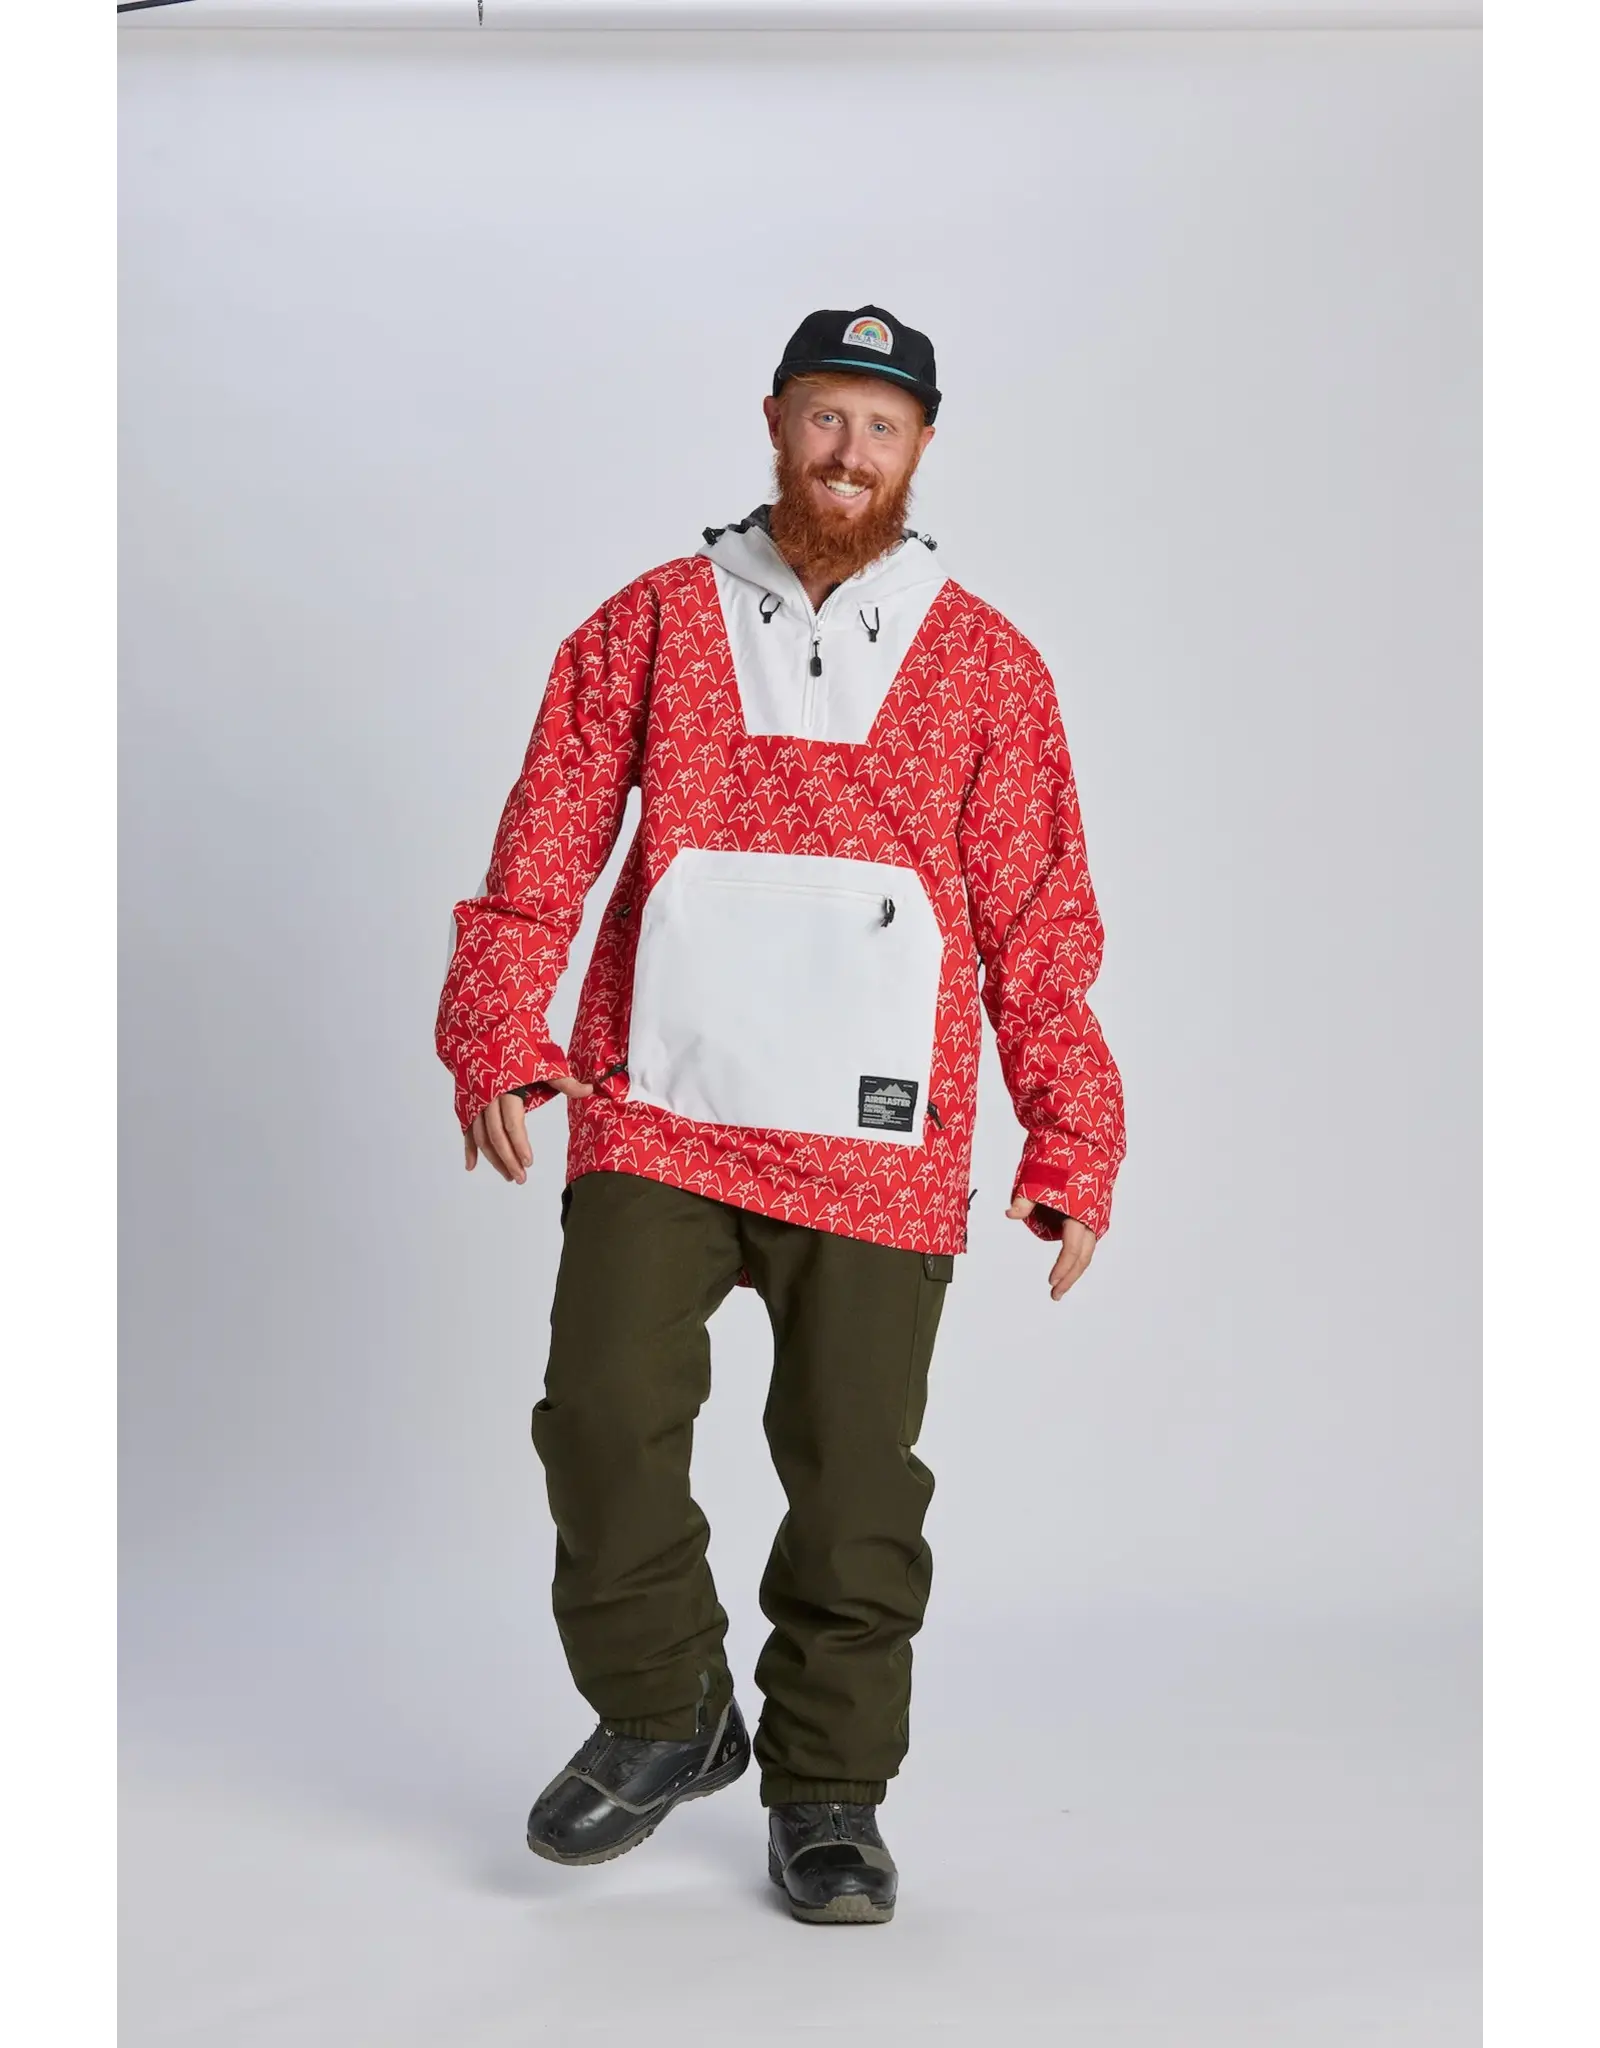 AIRBLASTER Freedom Pullover - Cherry Terry